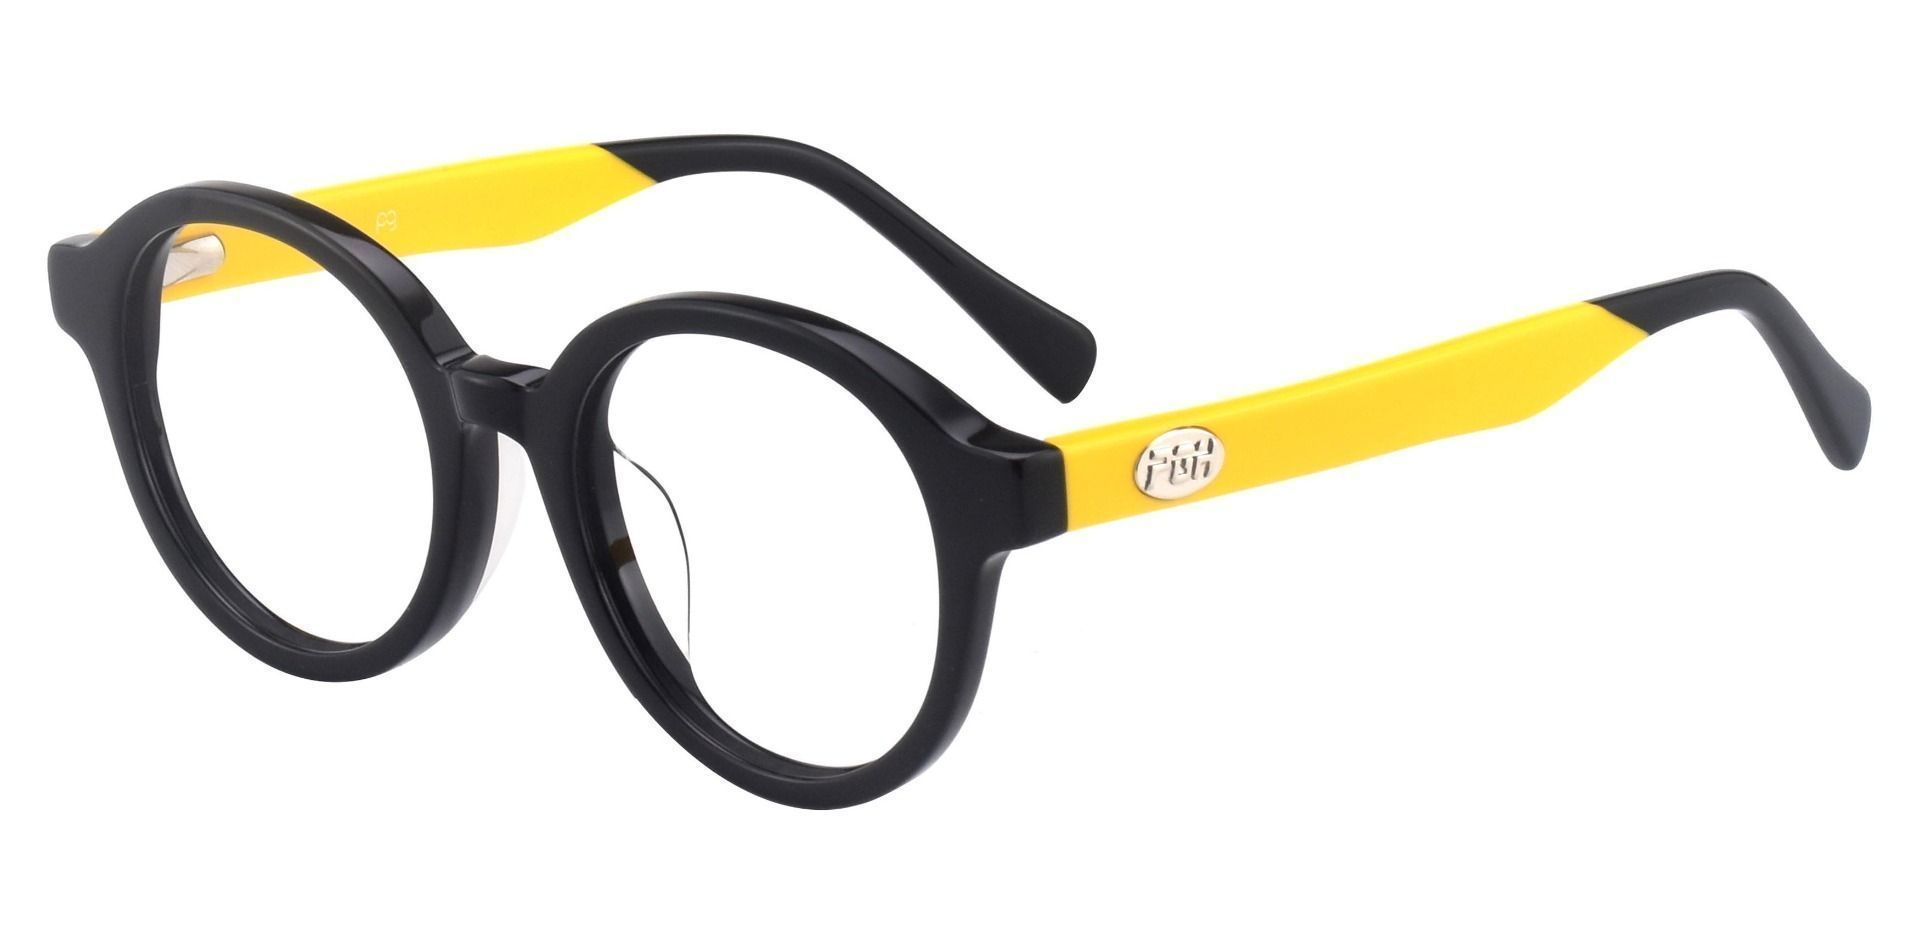 Steel City Round Prescription Glasses - The Frame Is Black And Gold